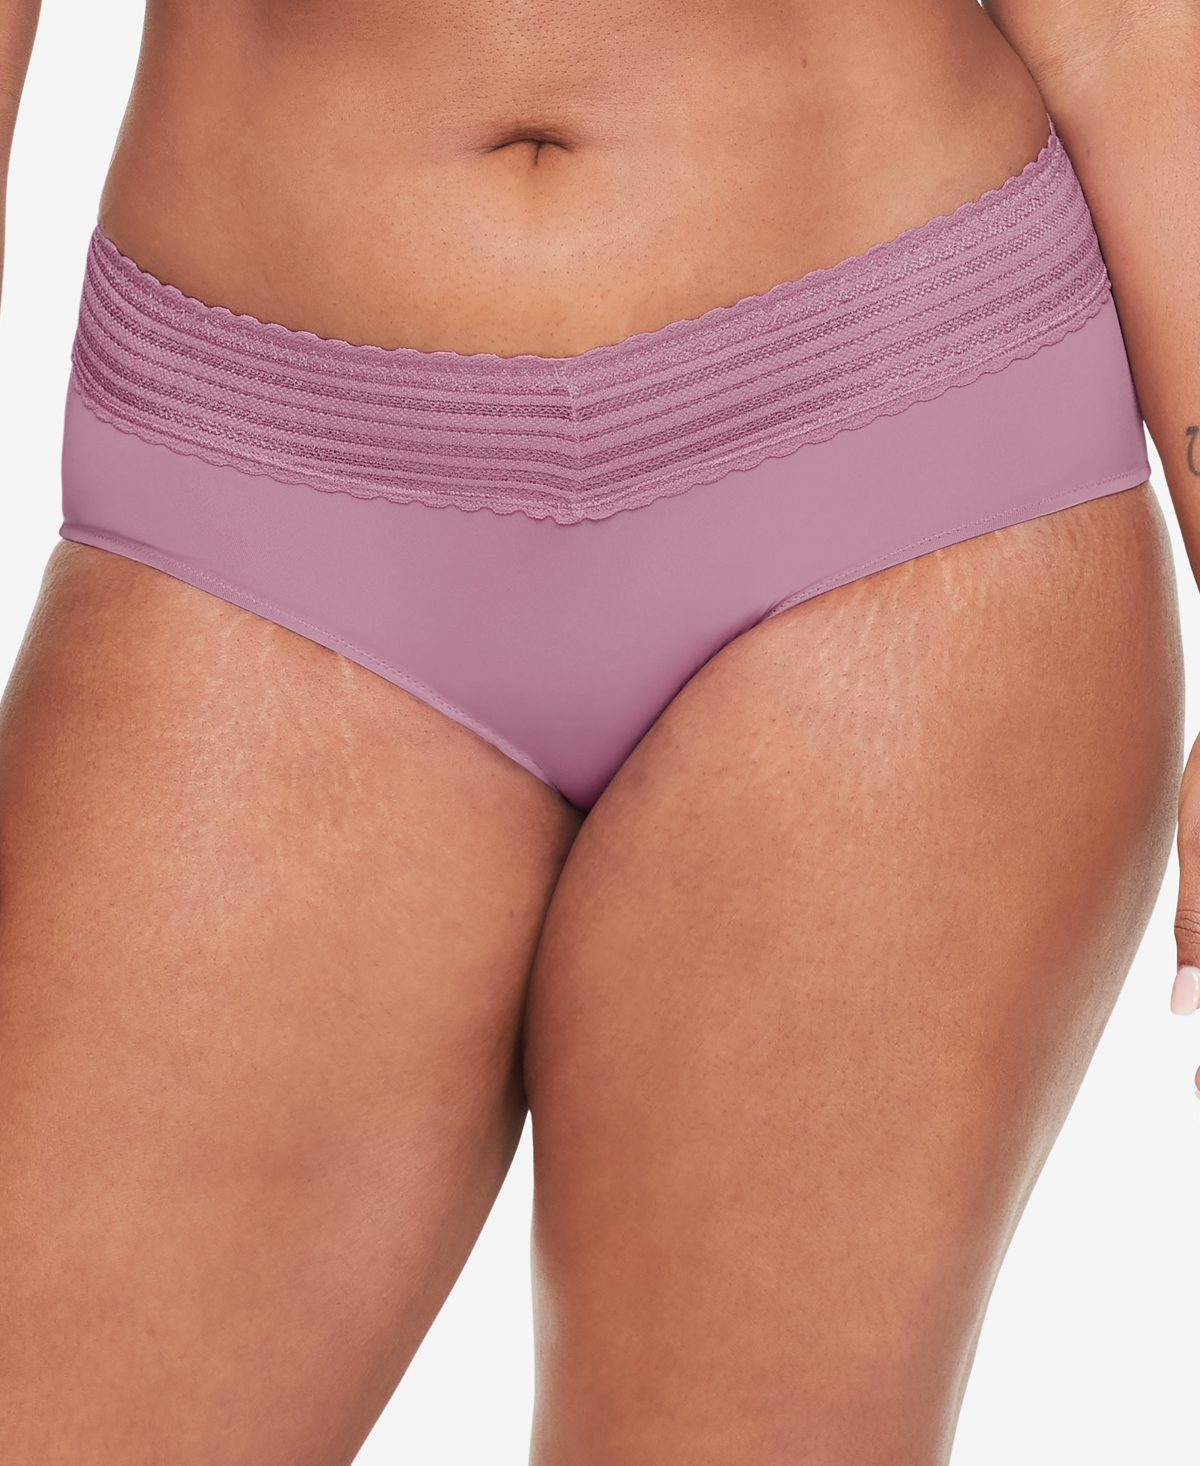 Warner's Warners No Pinching, No Problems Dig-free Comfort Waist With Lace Microfiber Hipster 5609j In Orchid Haze